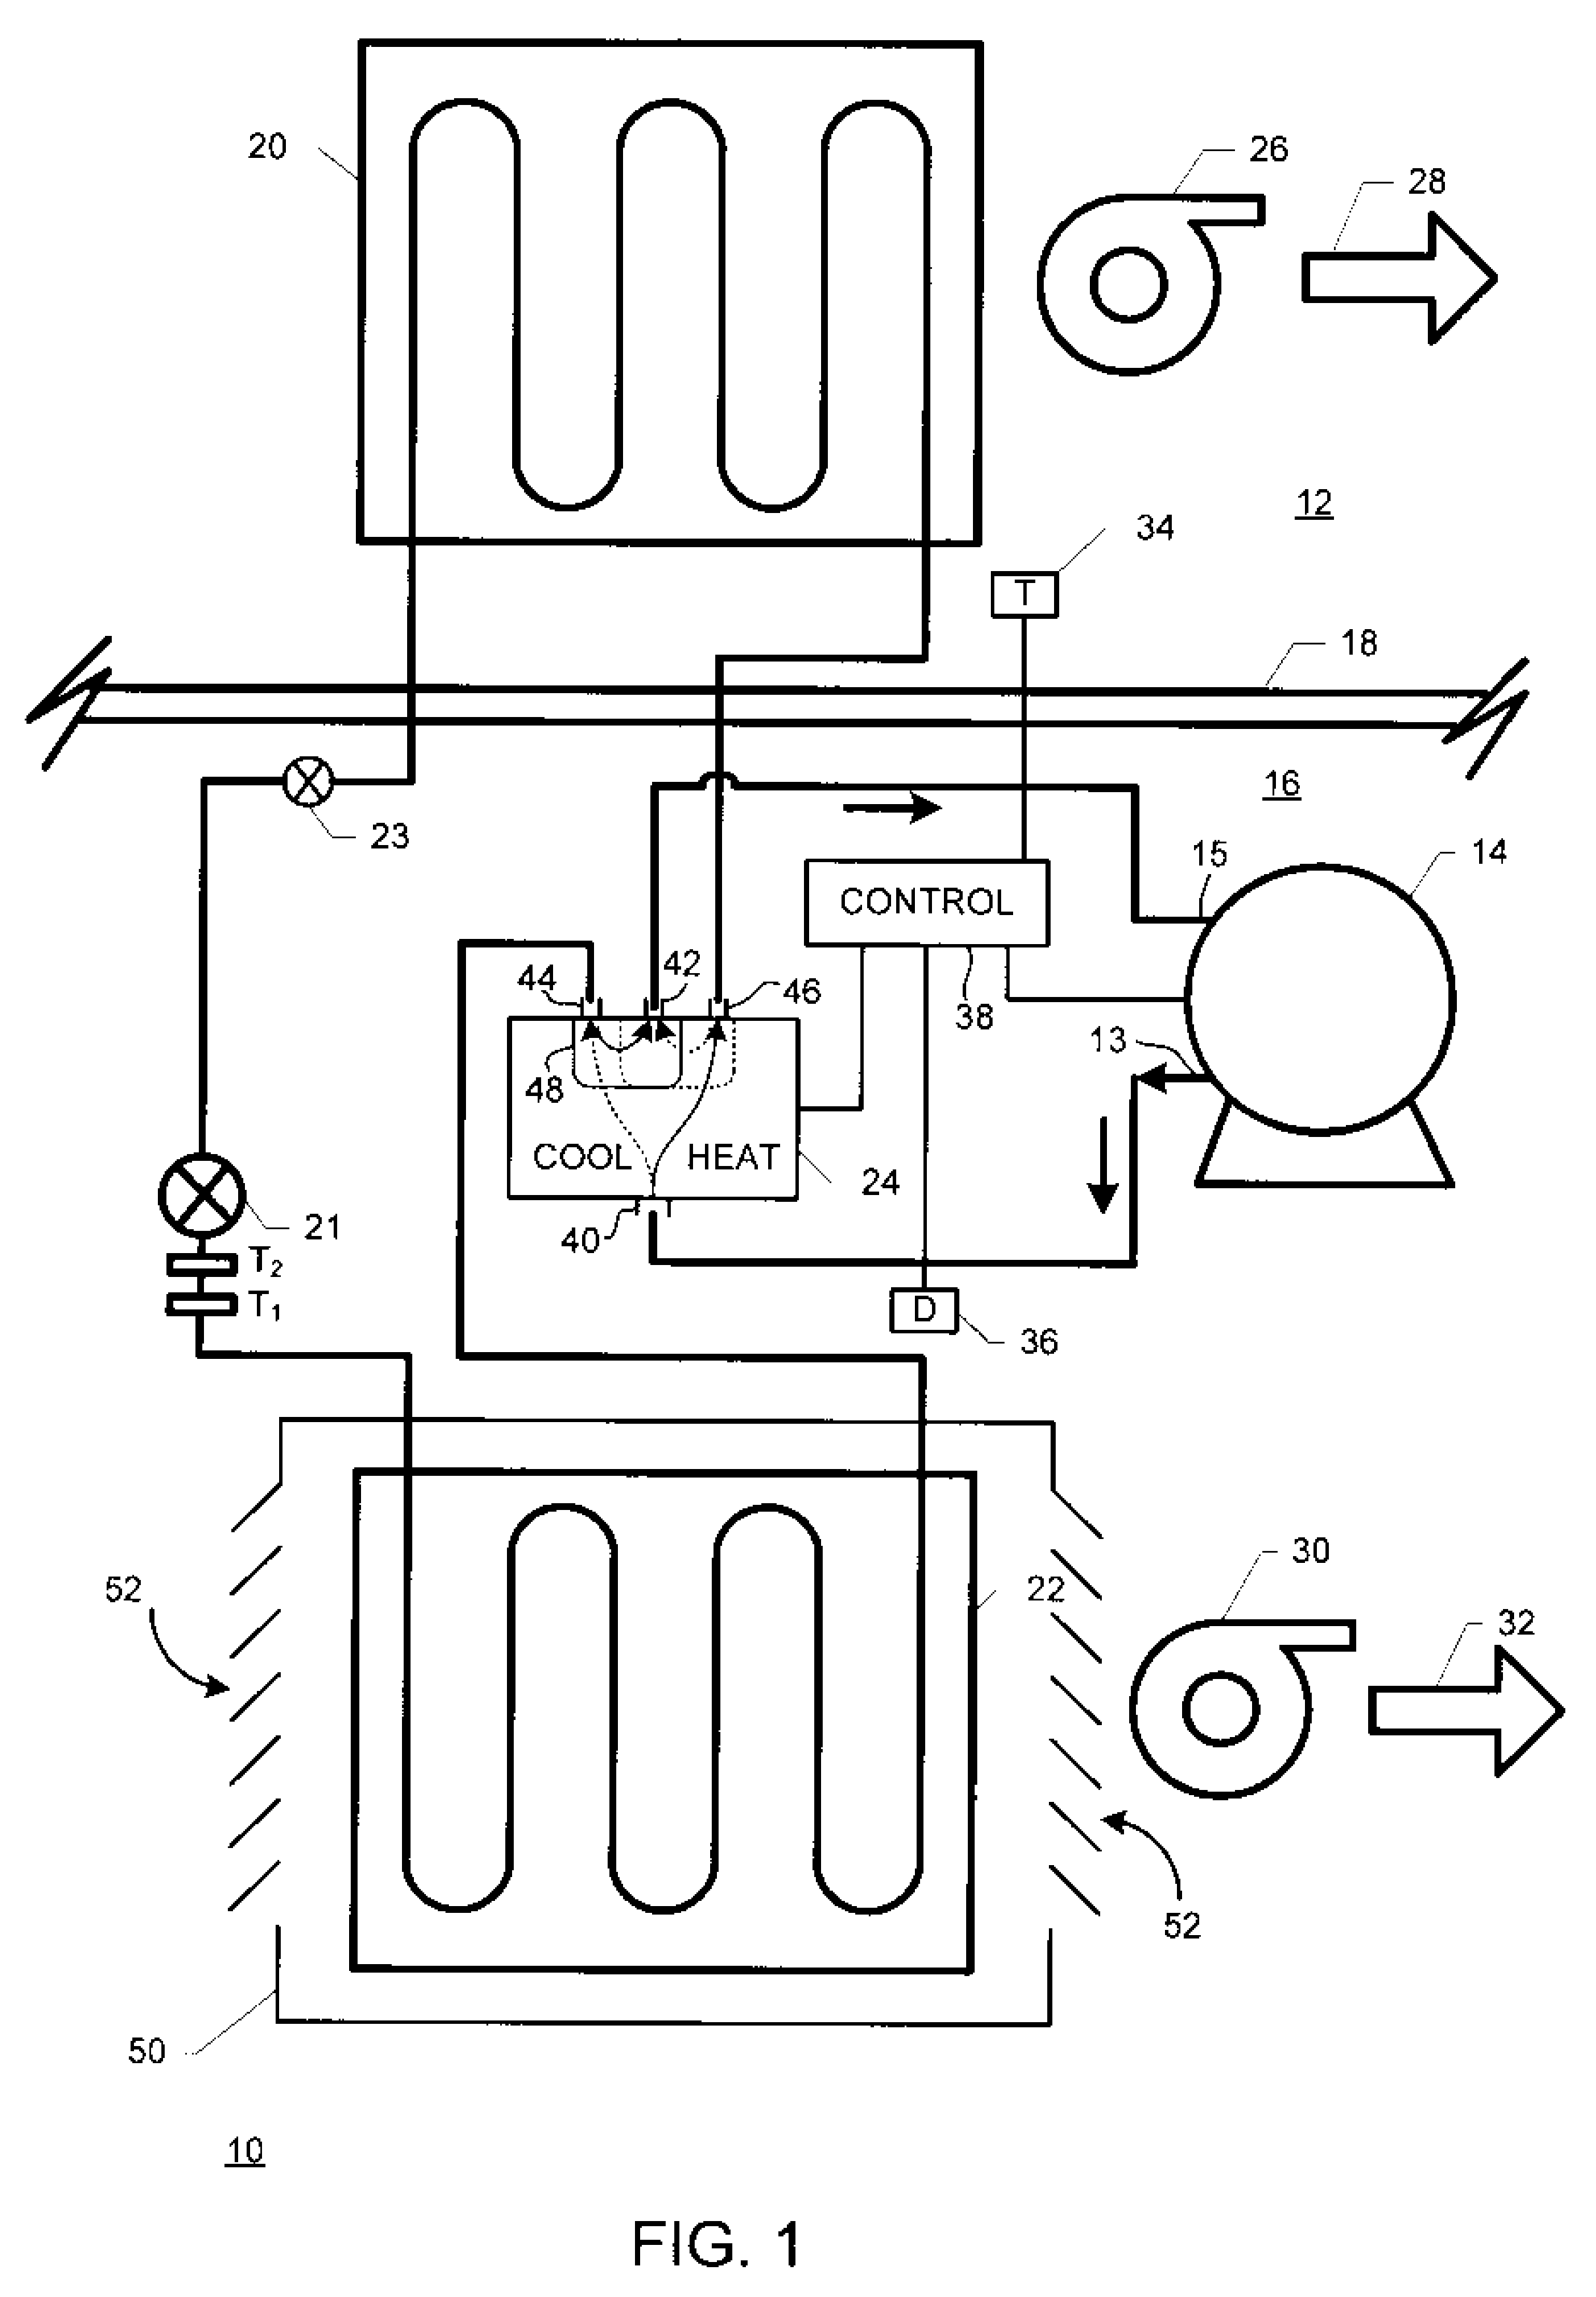 Method and apparatus for removing ice from outdoor housing for an environmental conditioning unit